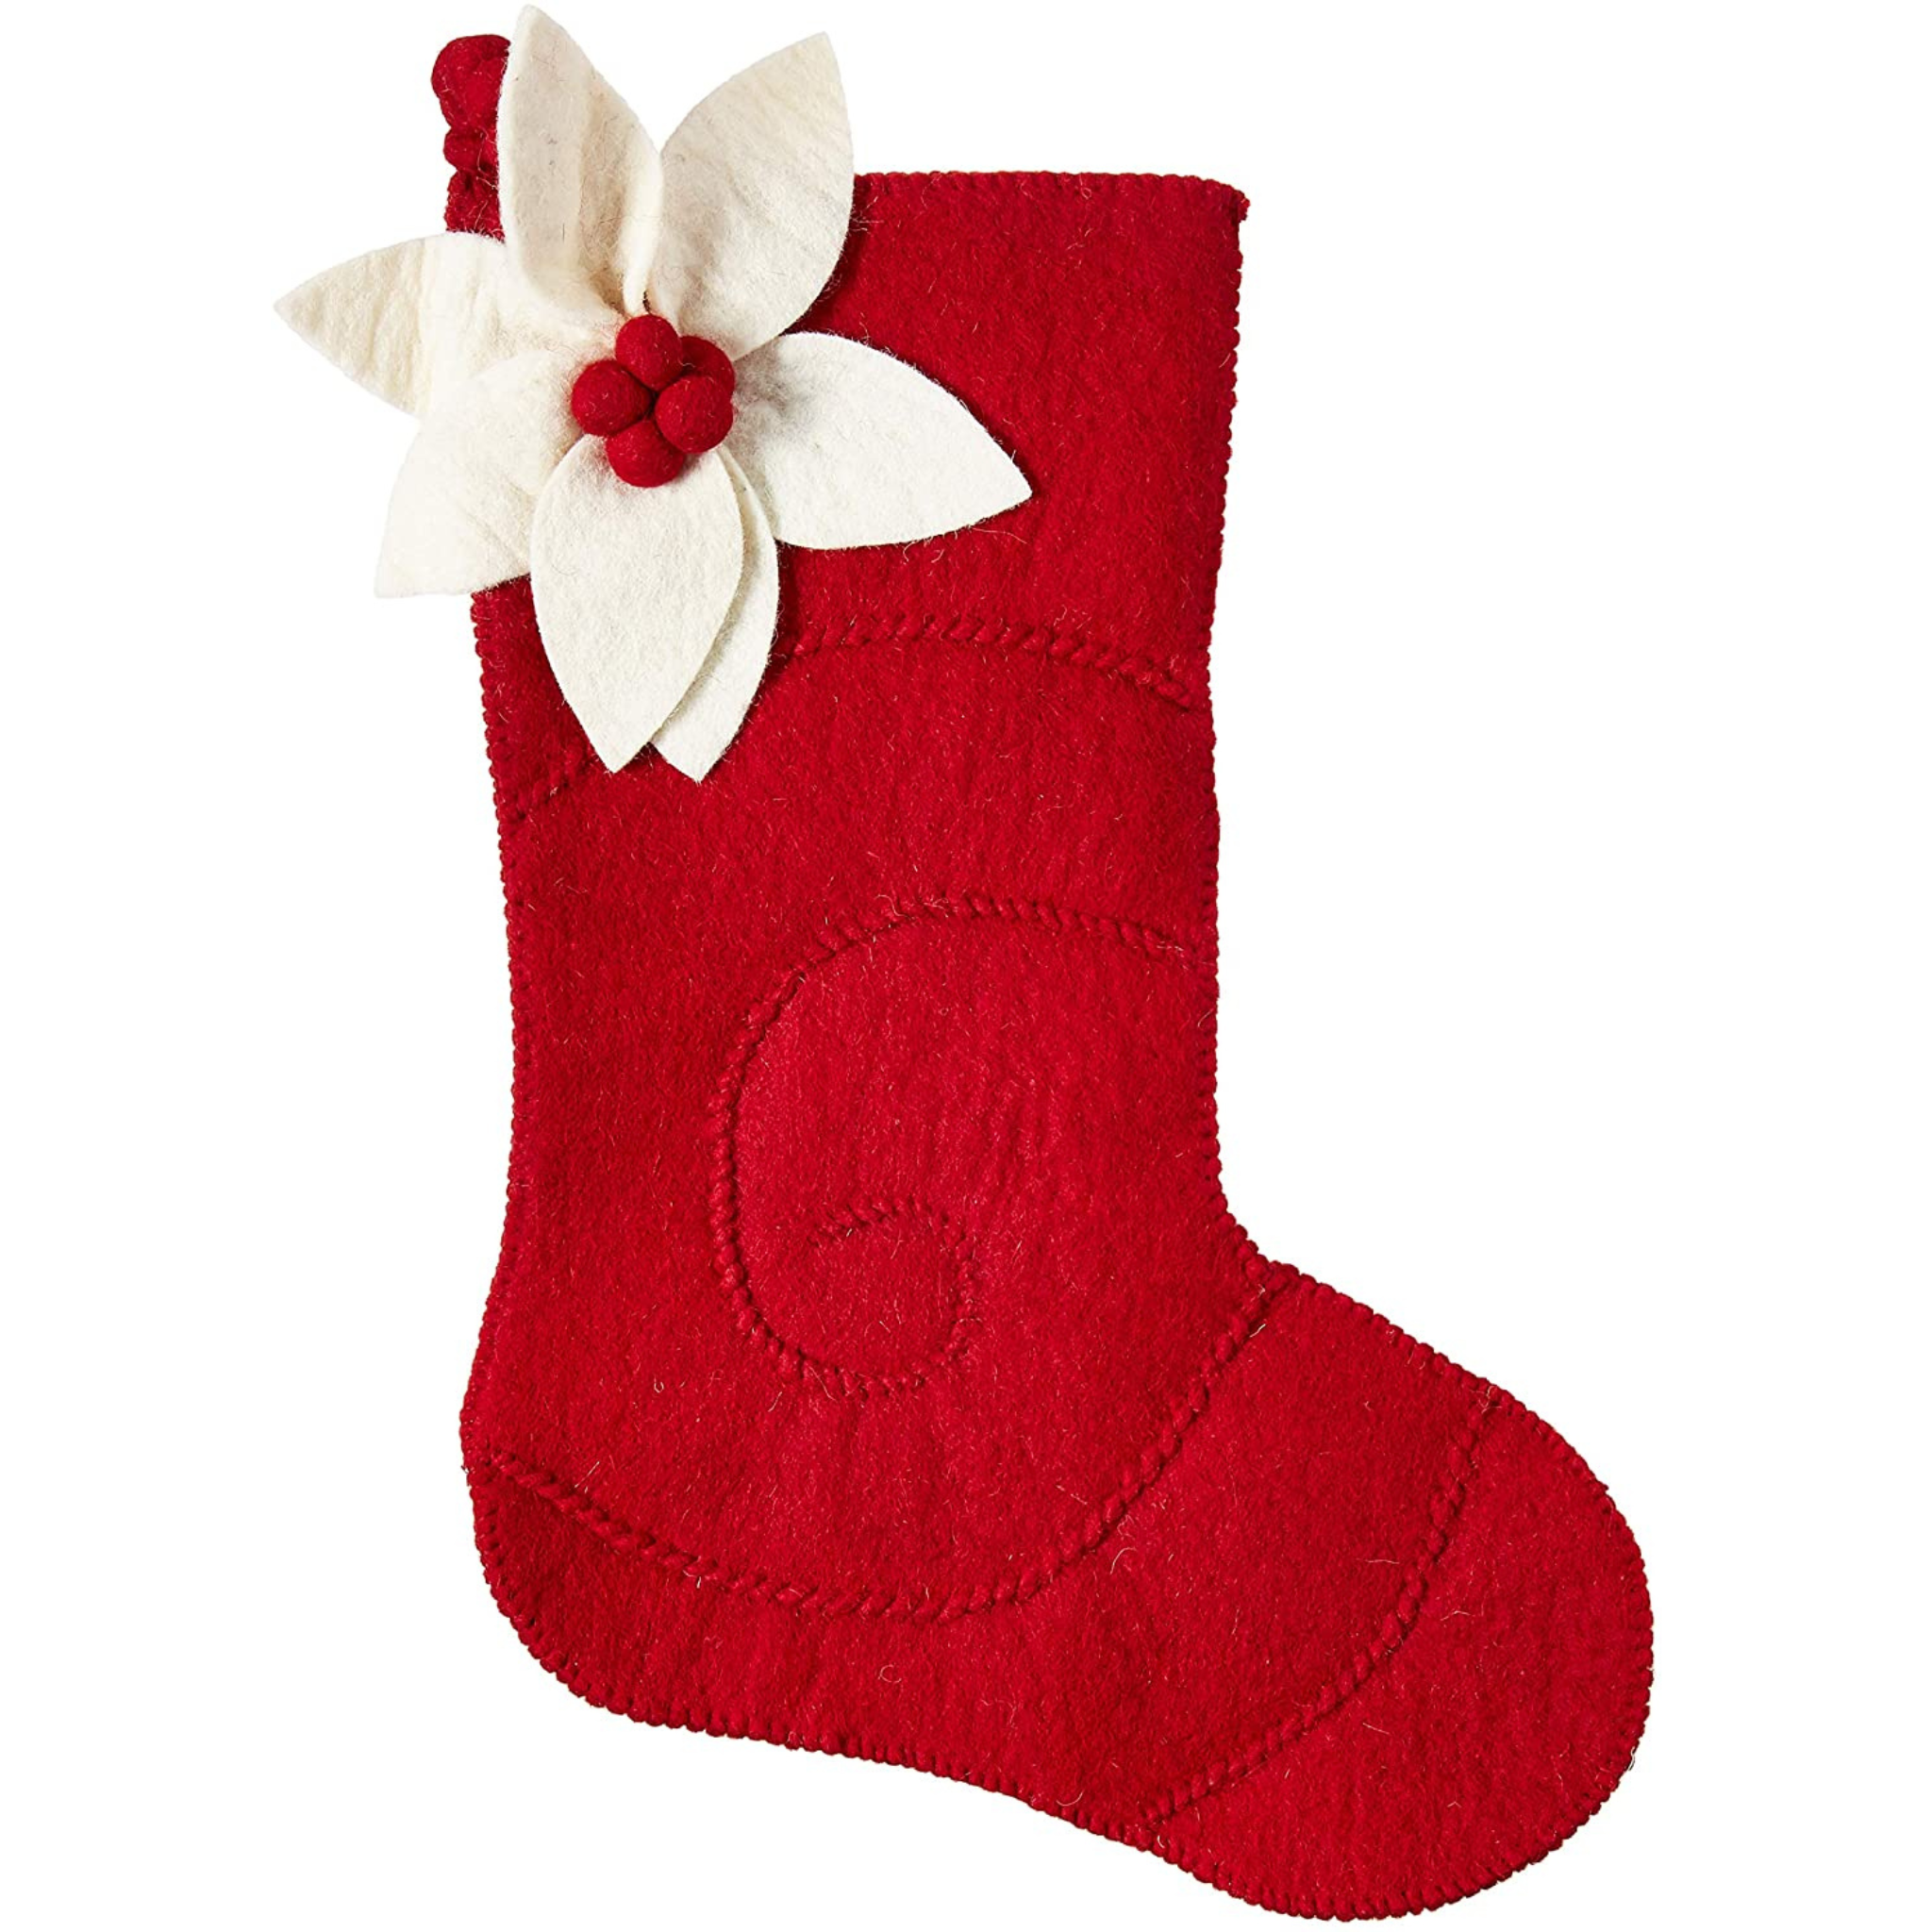 Set of 3 Felt Christmas Stockings Red with White Cuff - Ruby Lane